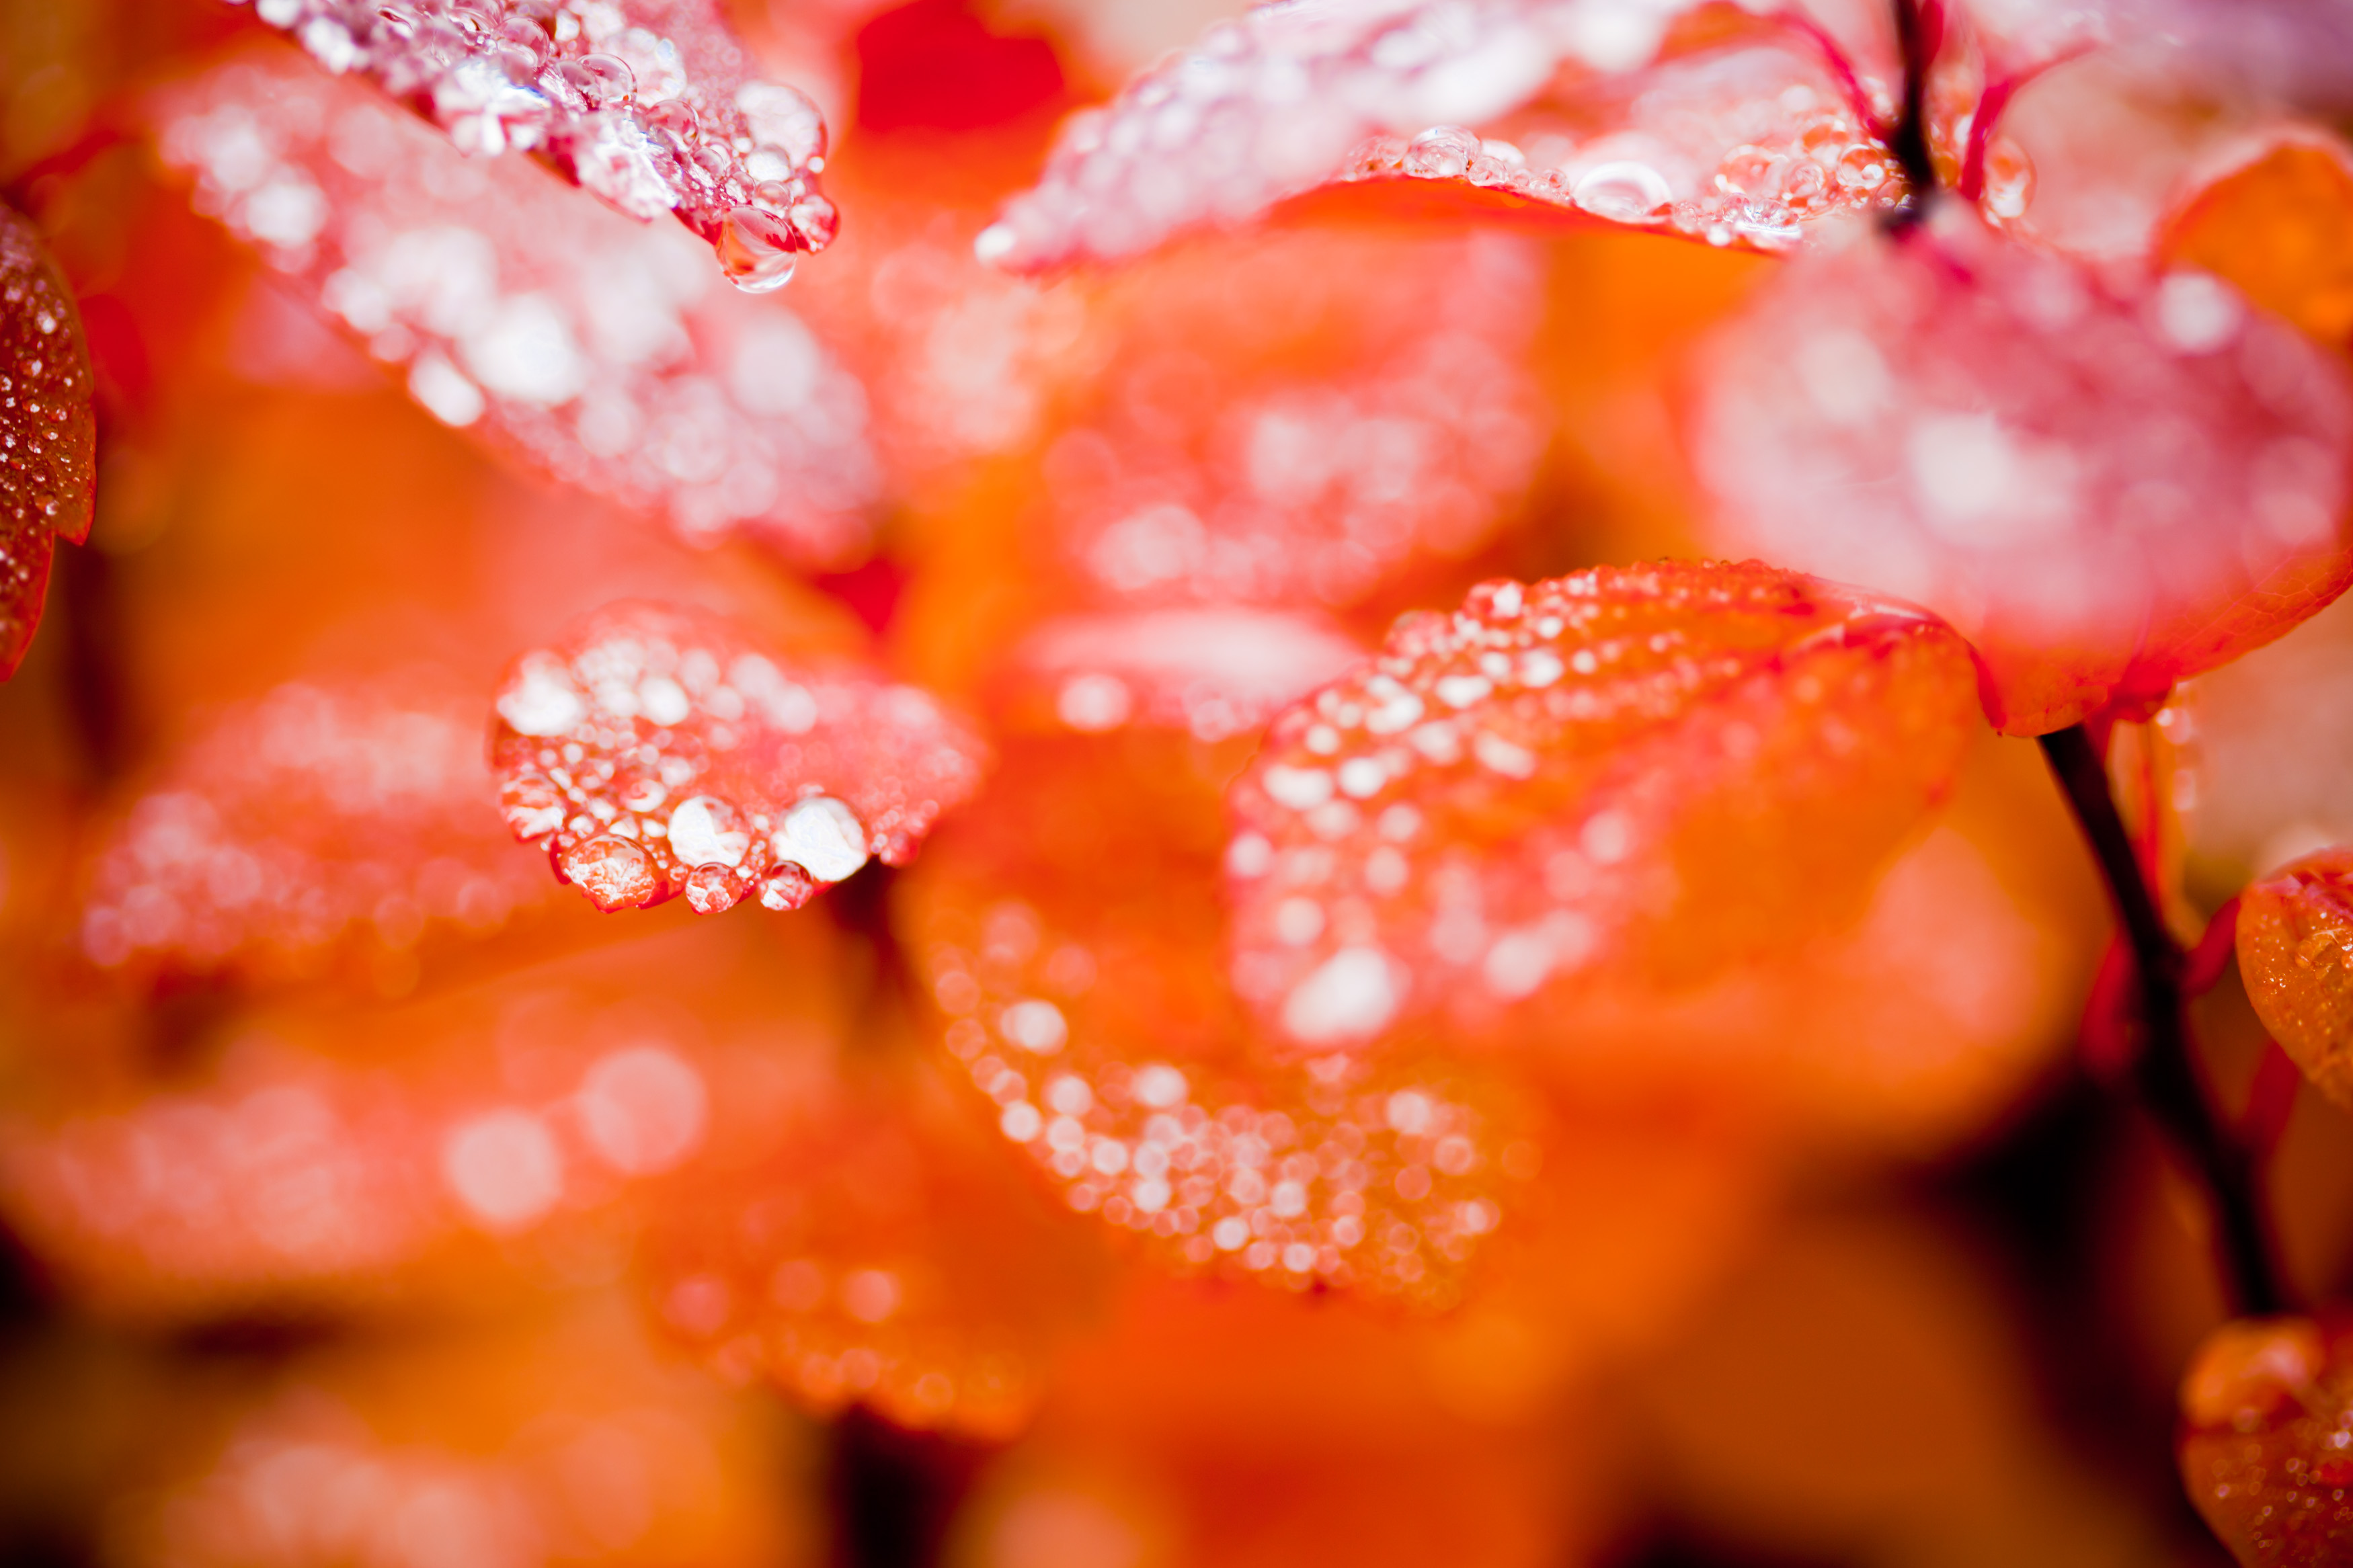 Drops of Water on Autumn Leaves, Autumn, Drop, Droplets, Foliage, HQ Photo